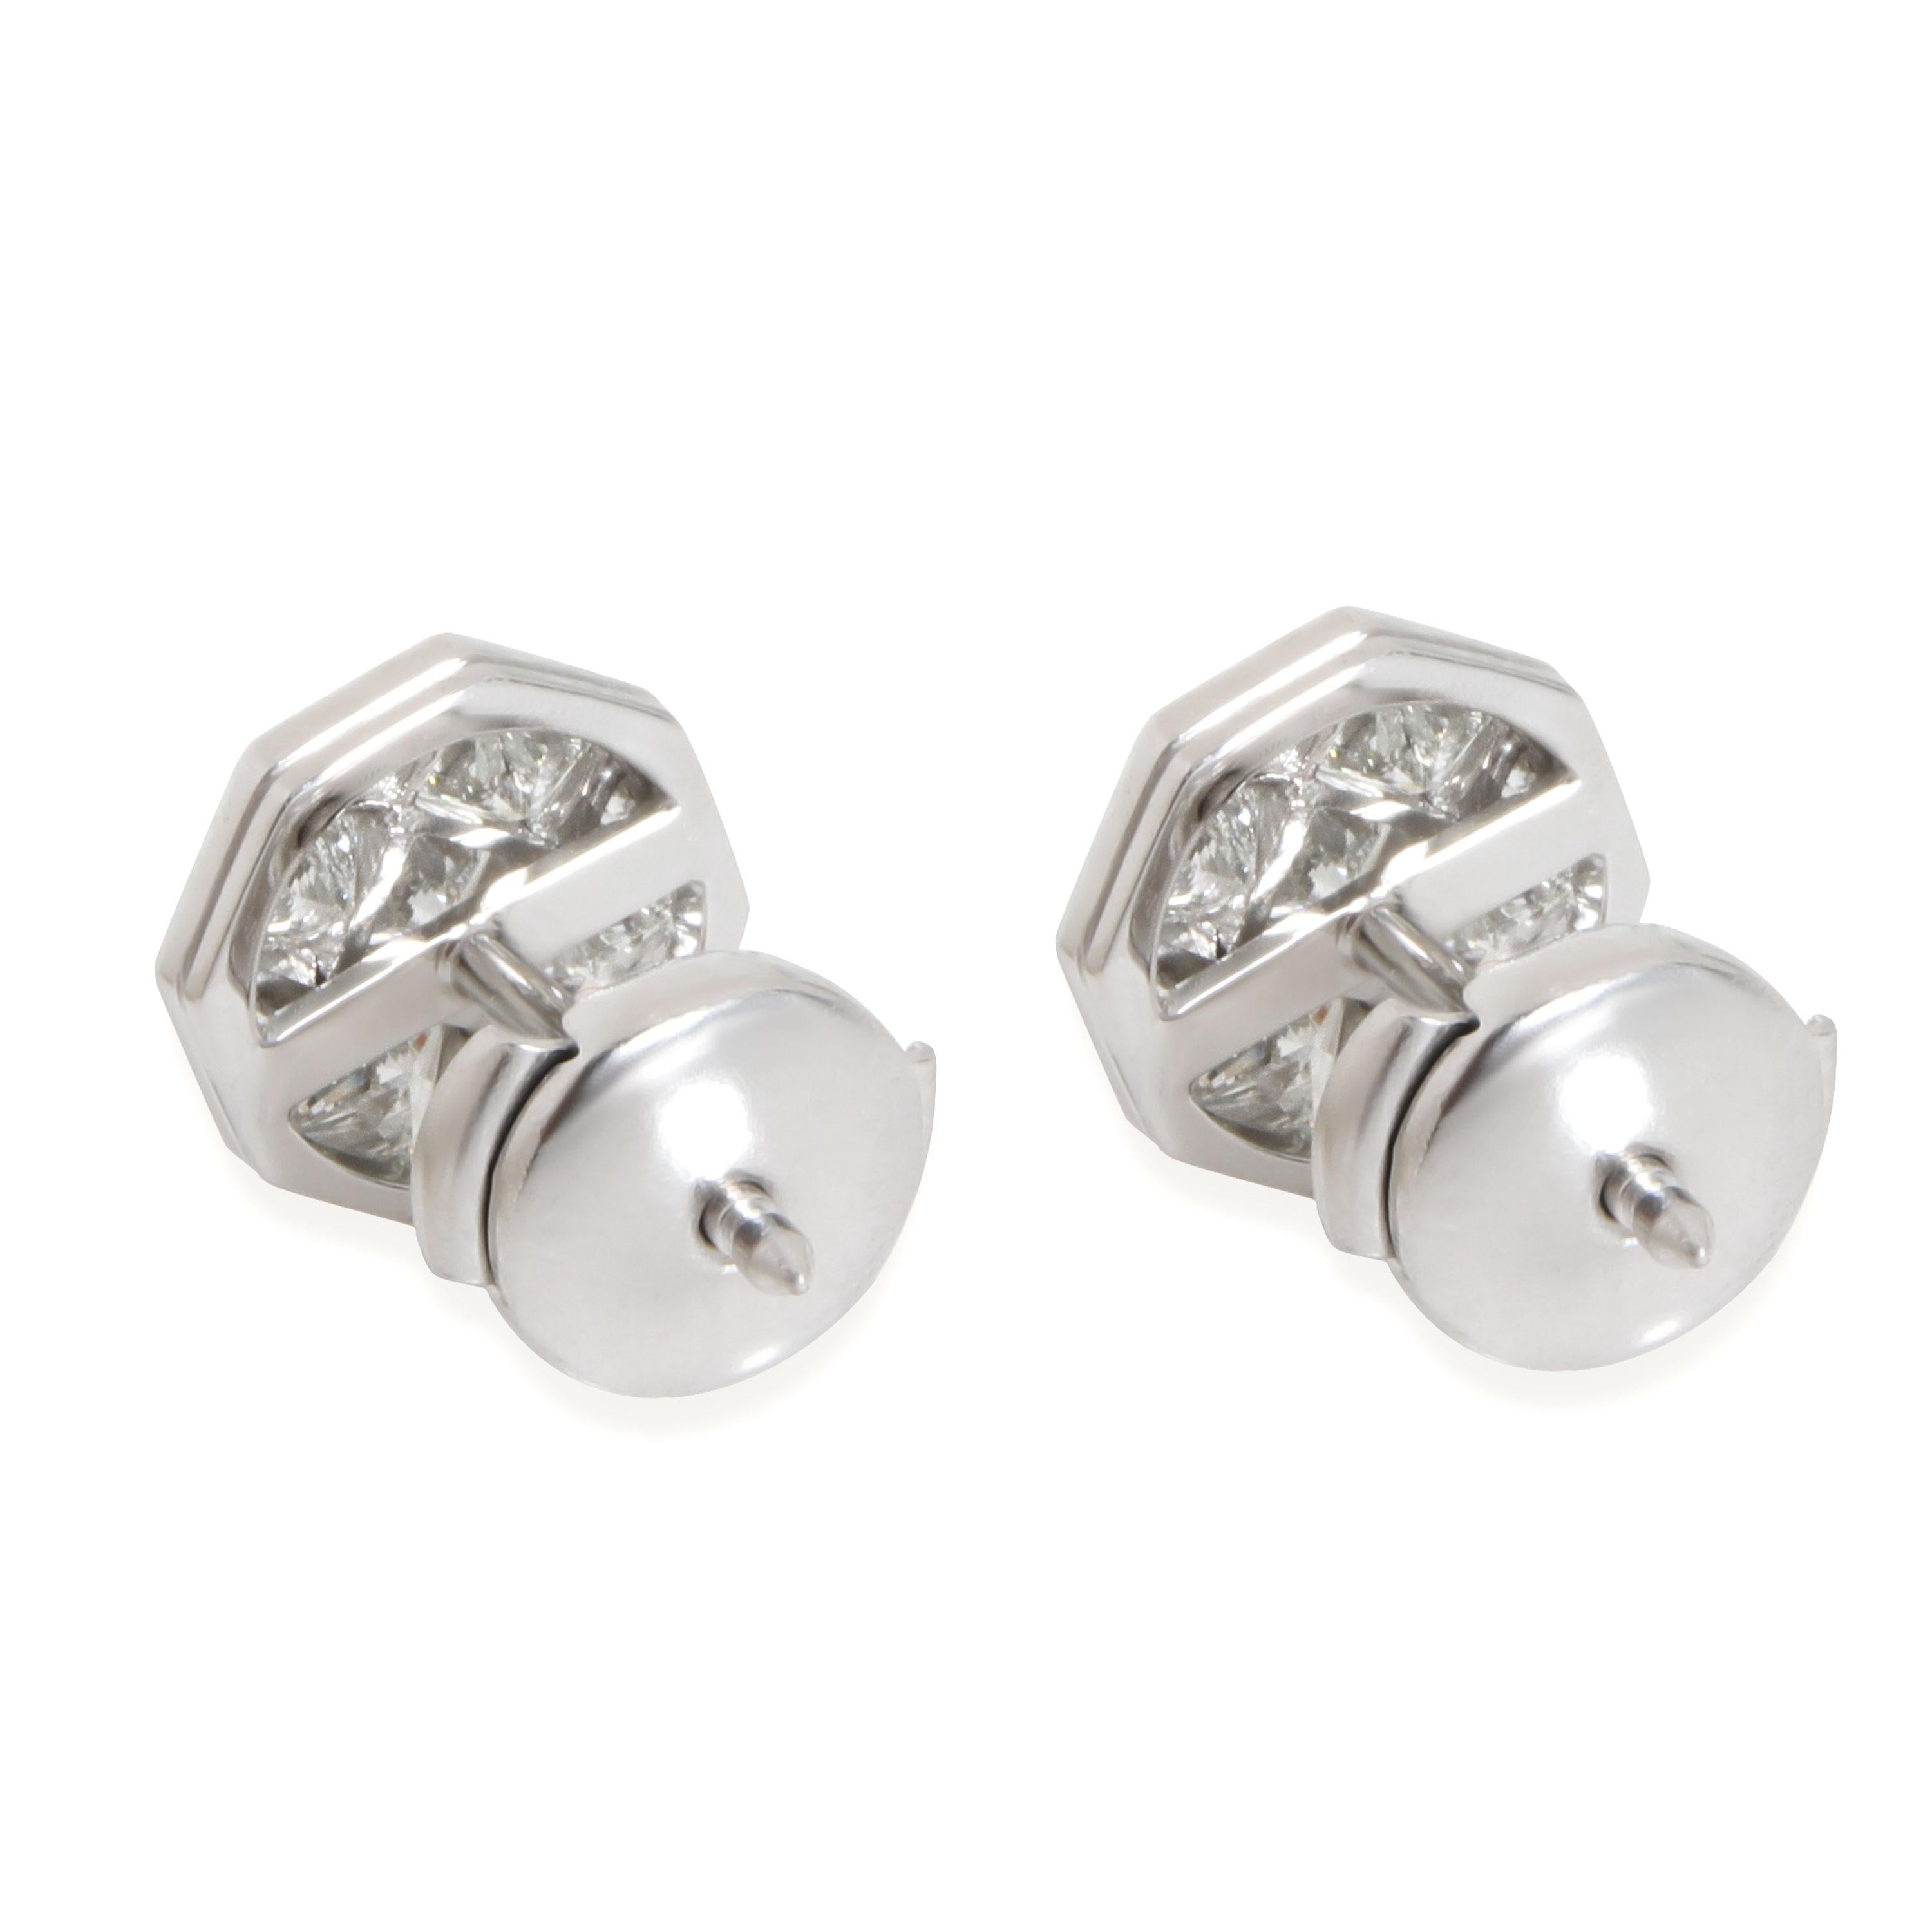 Tiffany & Co. Diamond Mosaic Stud Earring in  Platinum 1.15 CTW

PRIMARY DETAILS
SKU: 111575
Listing Title: Tiffany & Co. Diamond Mosaic Stud Earring in  Platinum 1.15 CTW
Condition Description: Retails for 9,000 USD. In excellent condition and